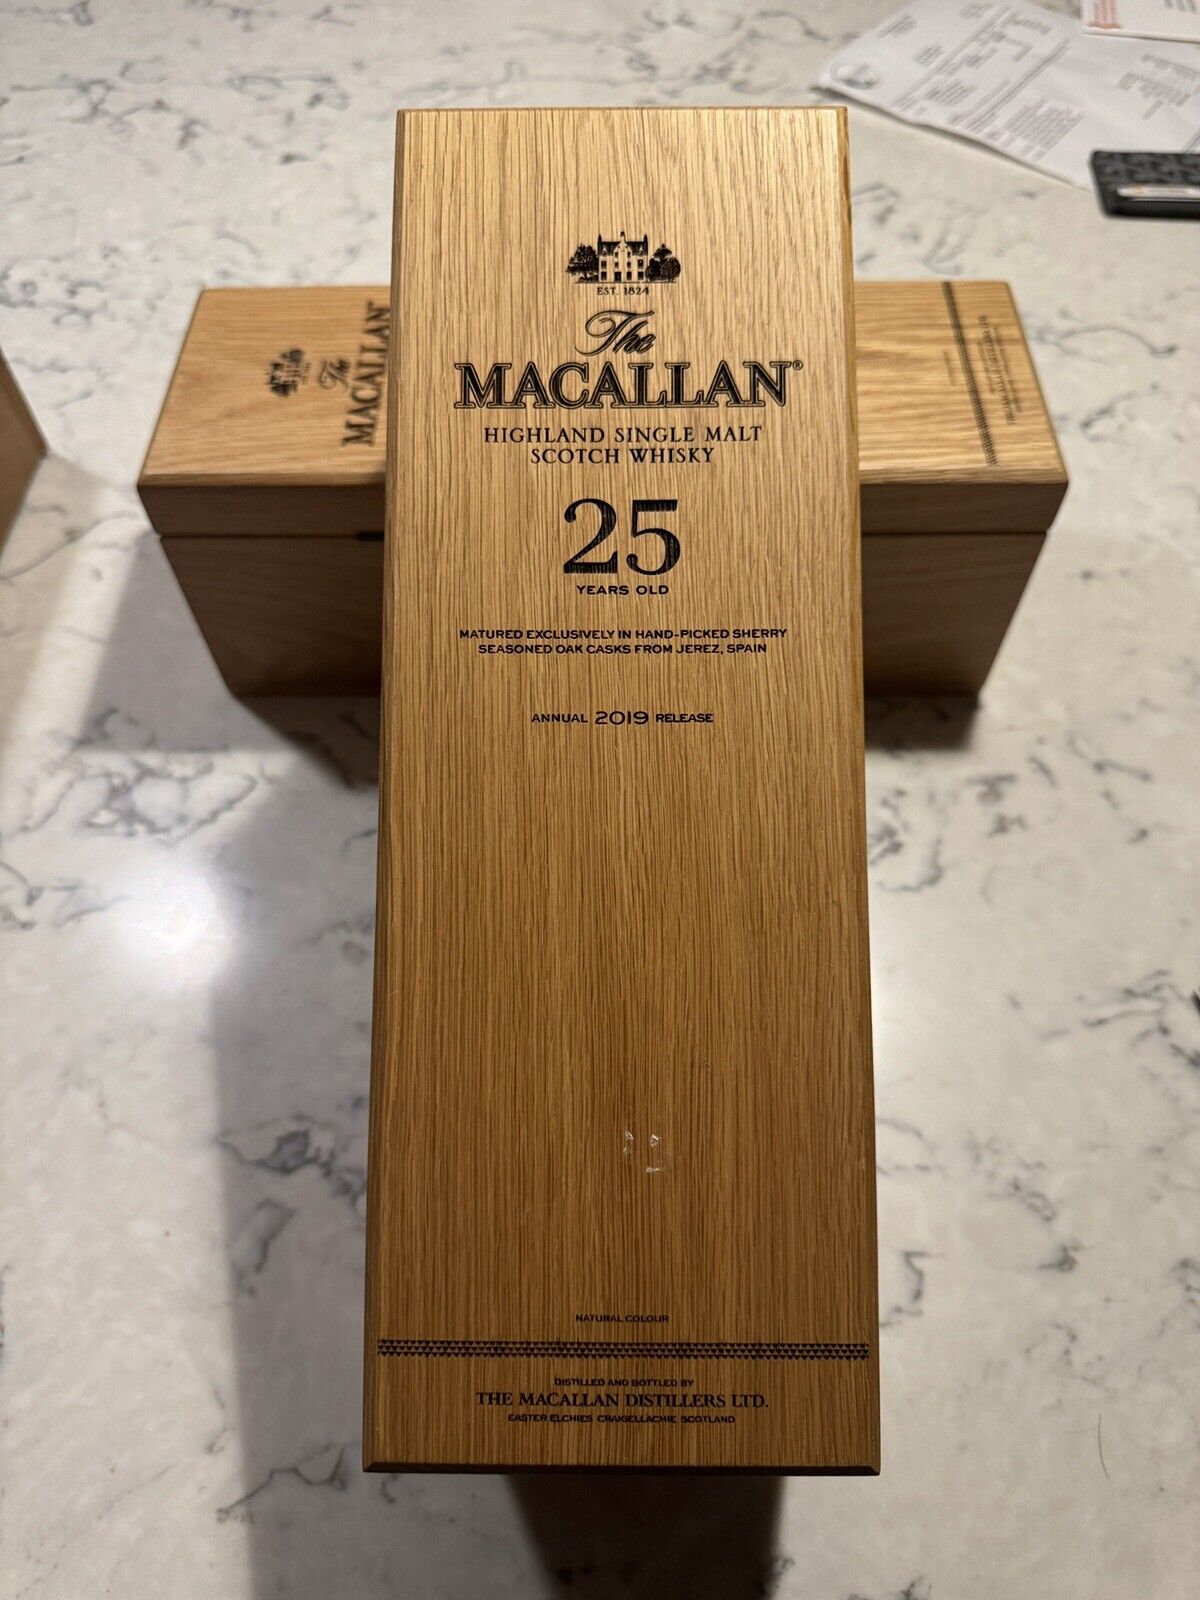 The Macallan 25 Year Old Highland Scotch Whisky Single  Empty Wooden Box 2019